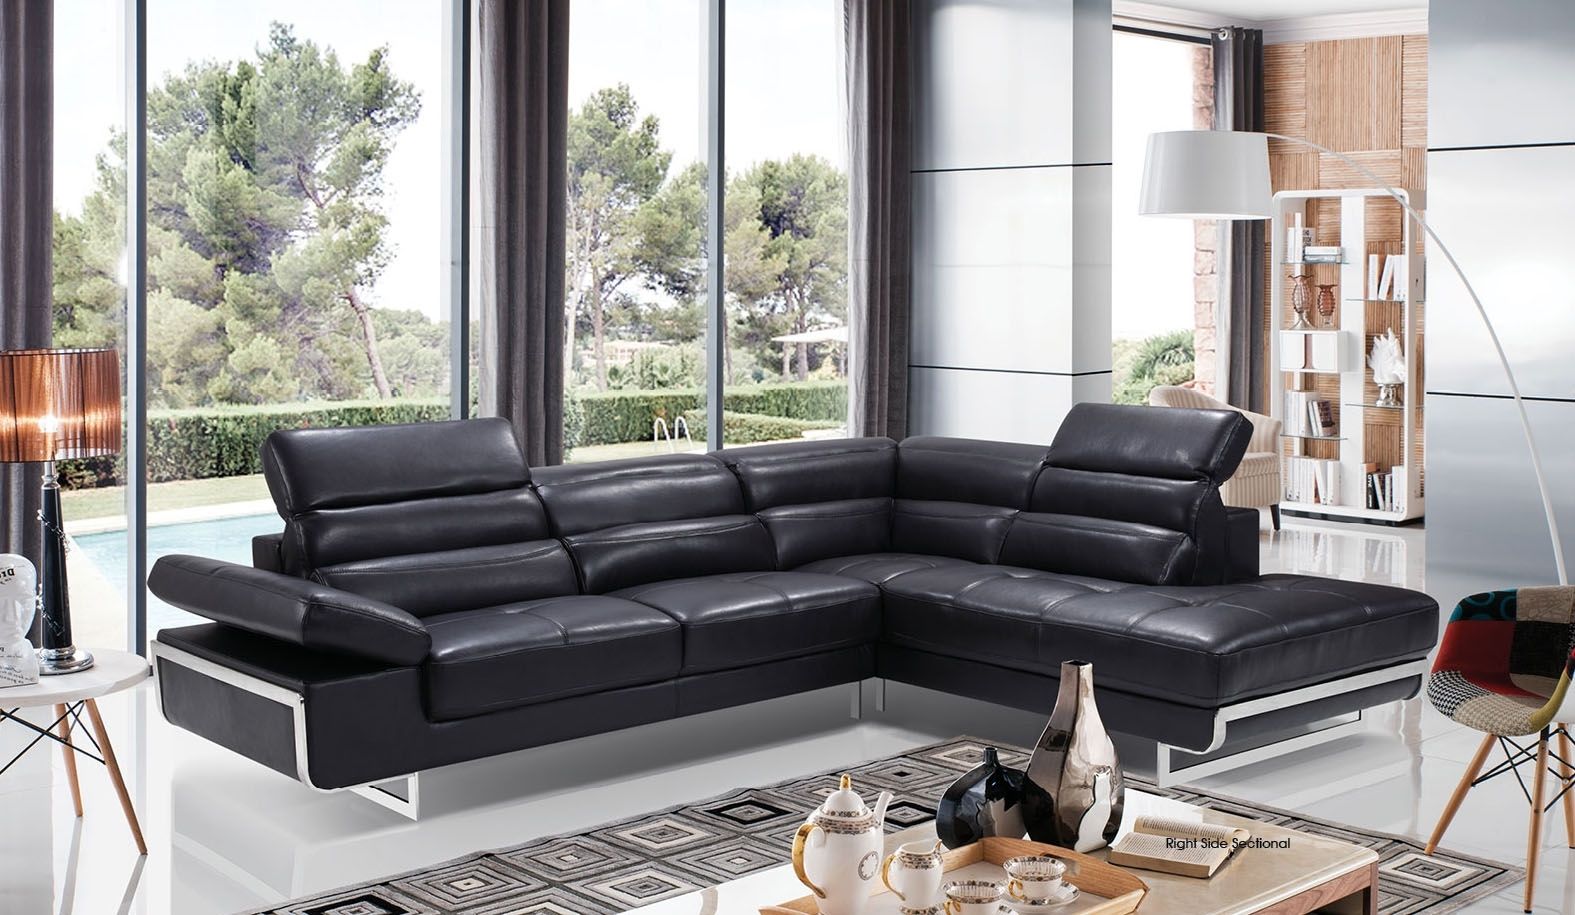 High Class Italian Leather Living Room Furniture Jacksonville Throughout Jacksonville Fl Sectional Sofas (View 4 of 10)